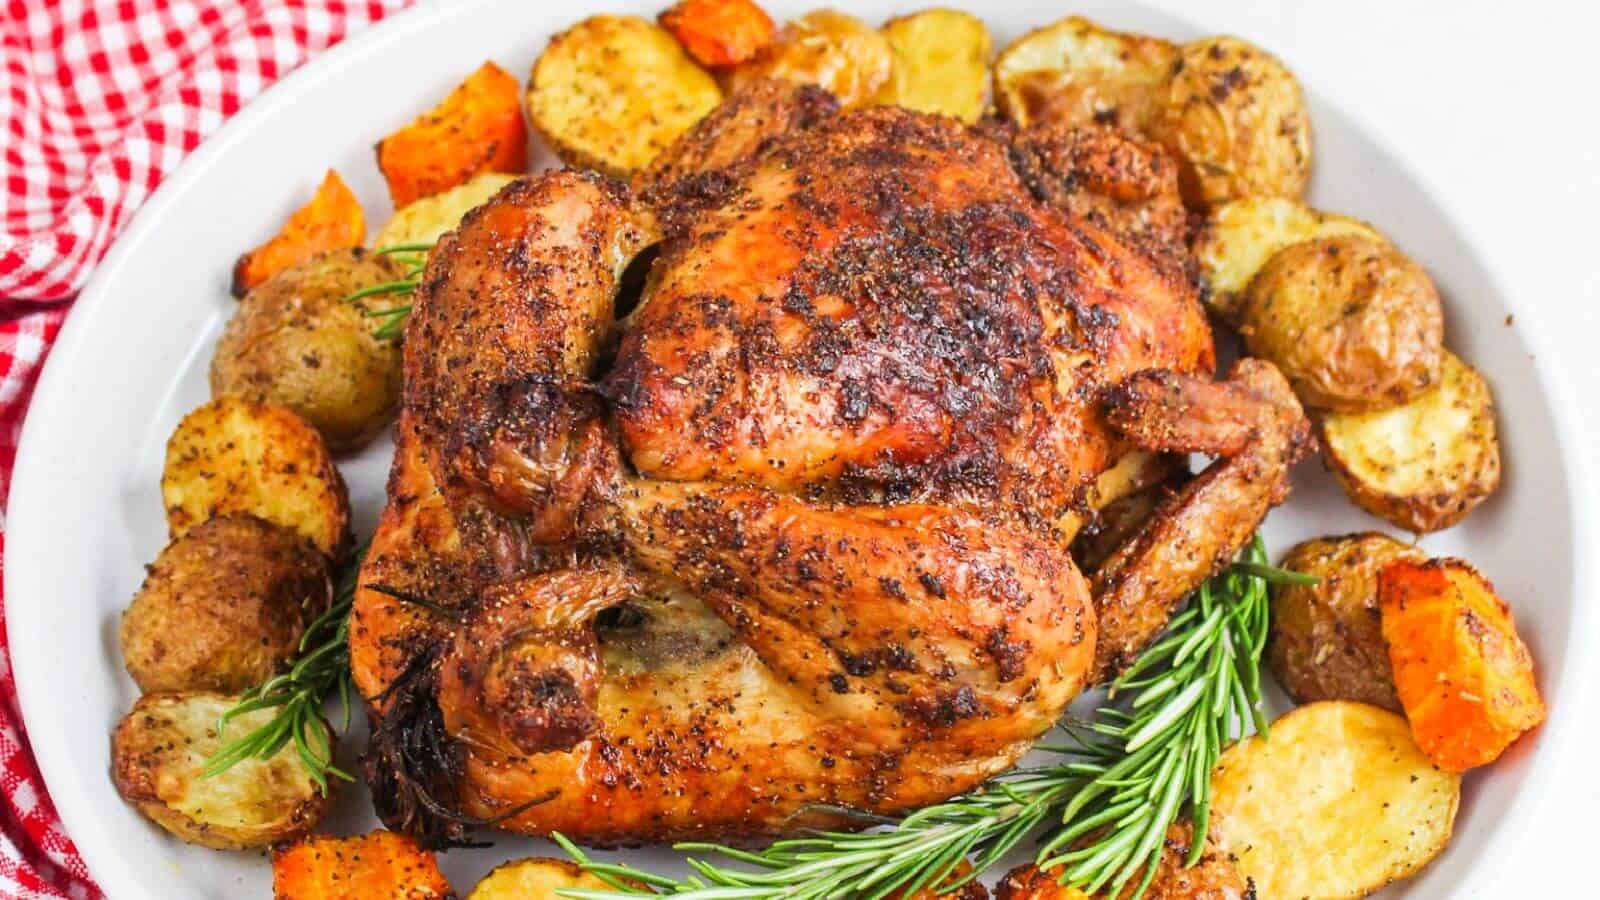 Roasted chicken with potatoes and carrots on a white plate.